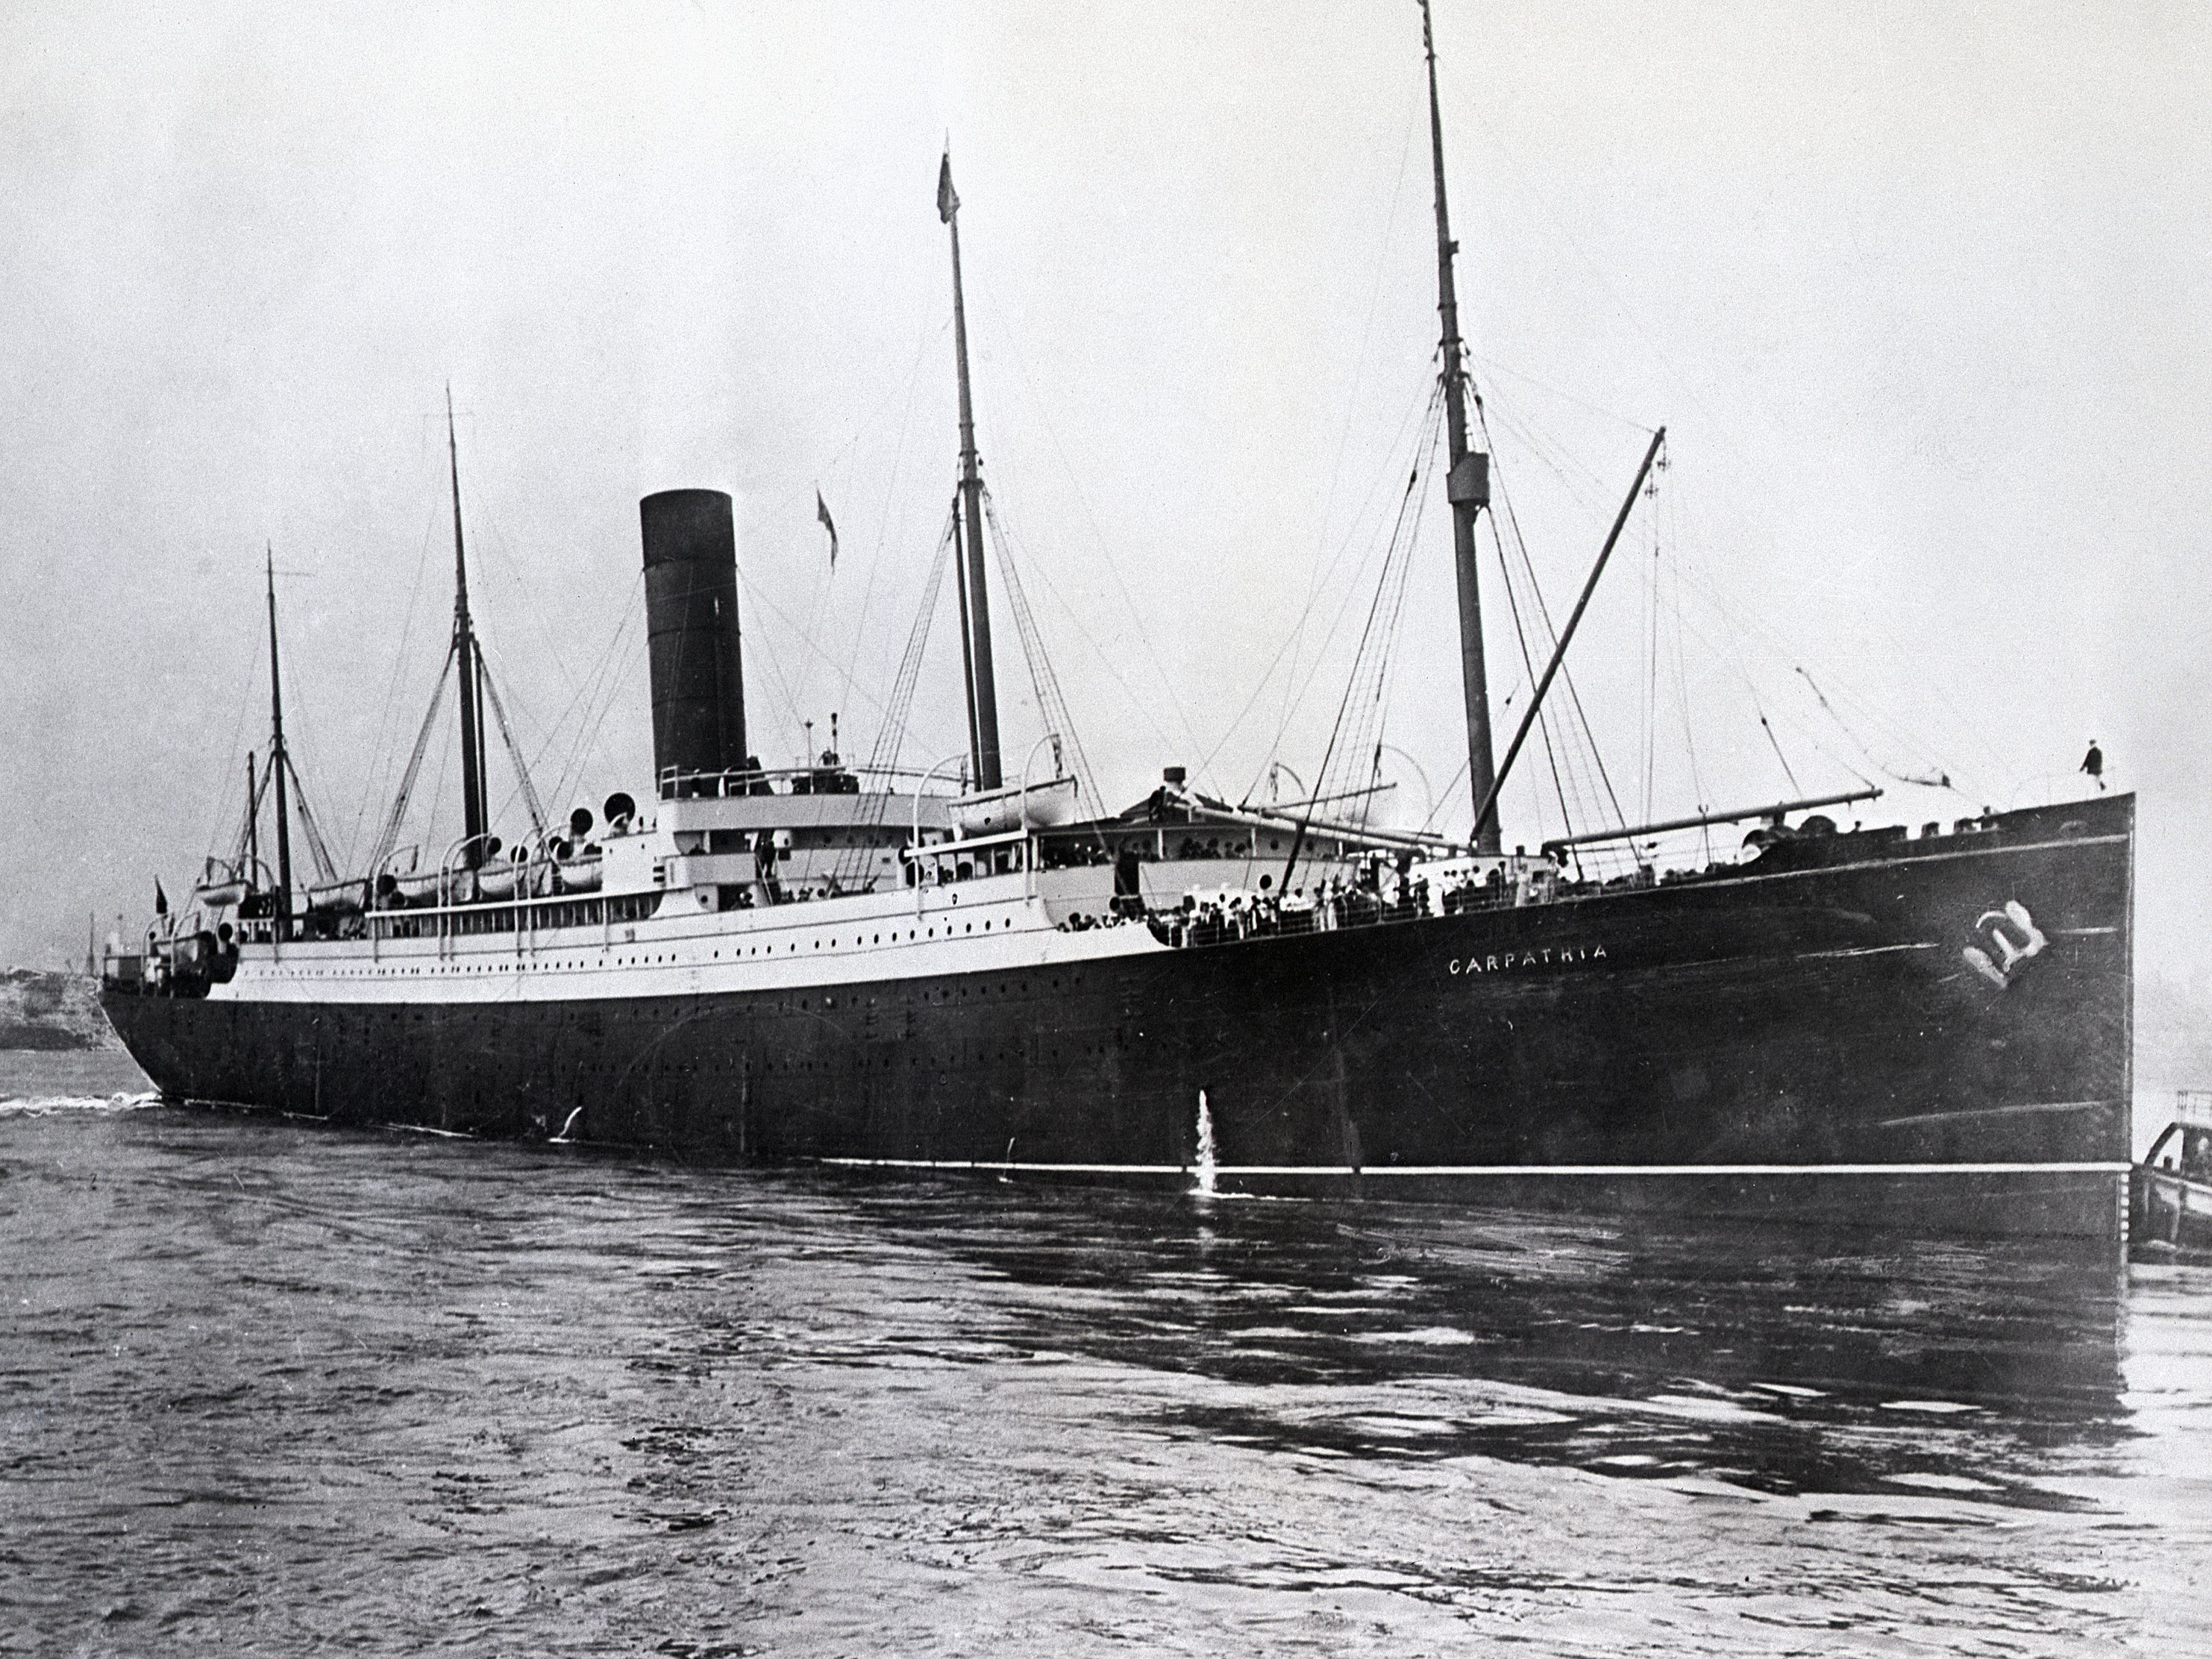 <p>The <a href="https://www.britannica.com/topic/Titanic/Discovery-and-legacy">Titanic's distress call</a> reached the Carpathia, a transatlantic passenger liner manned by <a href="https://www.maritime-executive.com/article/carpathias-role-in-titanic-rescue">Captain Arthur Rostron</a>, at 12:20 a.m. — but it was more than 3 hours away. </p><p>Likewise, another ship, the Olympic, was too far away to help.</p>